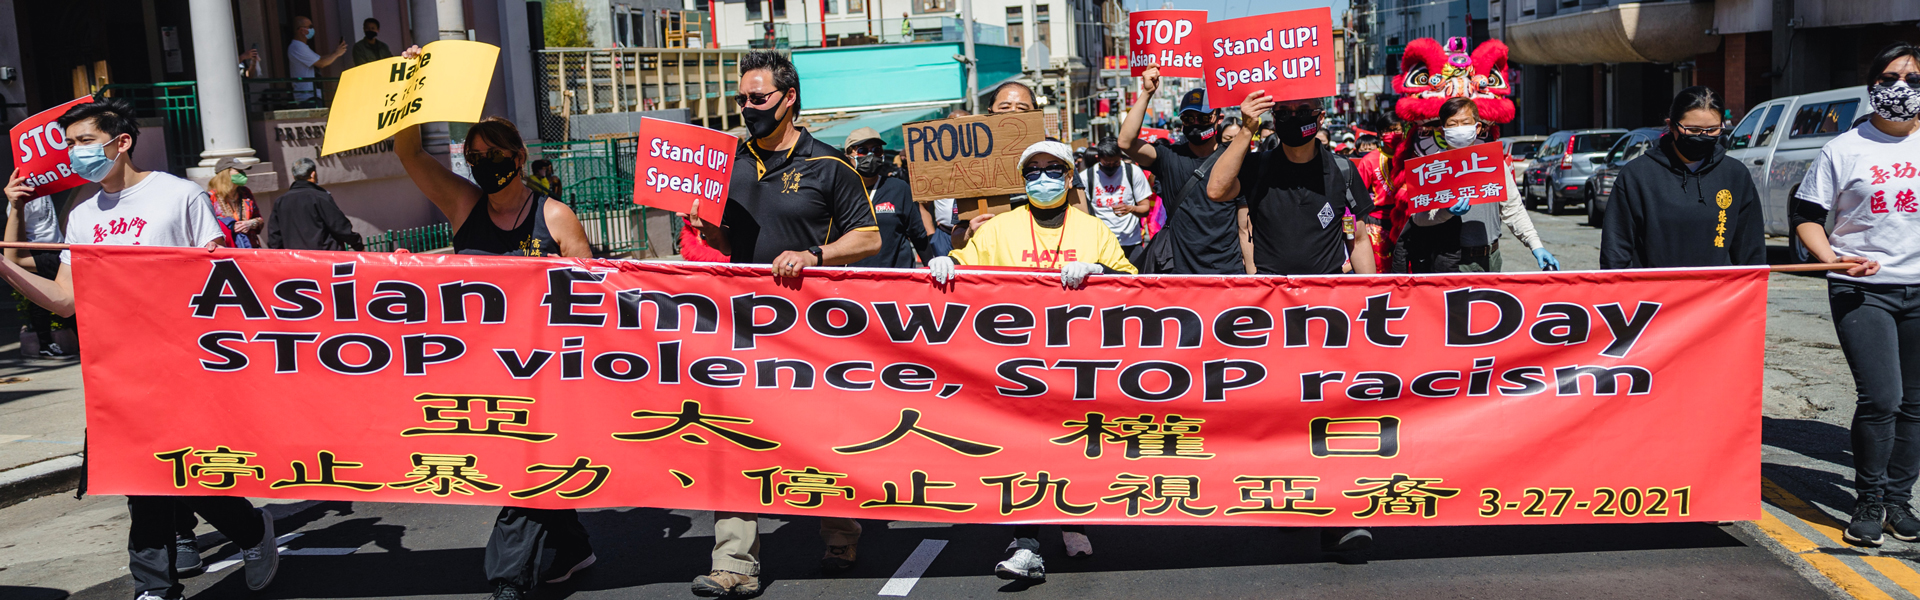 People holding a banner walking down a street "Asian Empowerment Day" Stop the violence, Stop racism.